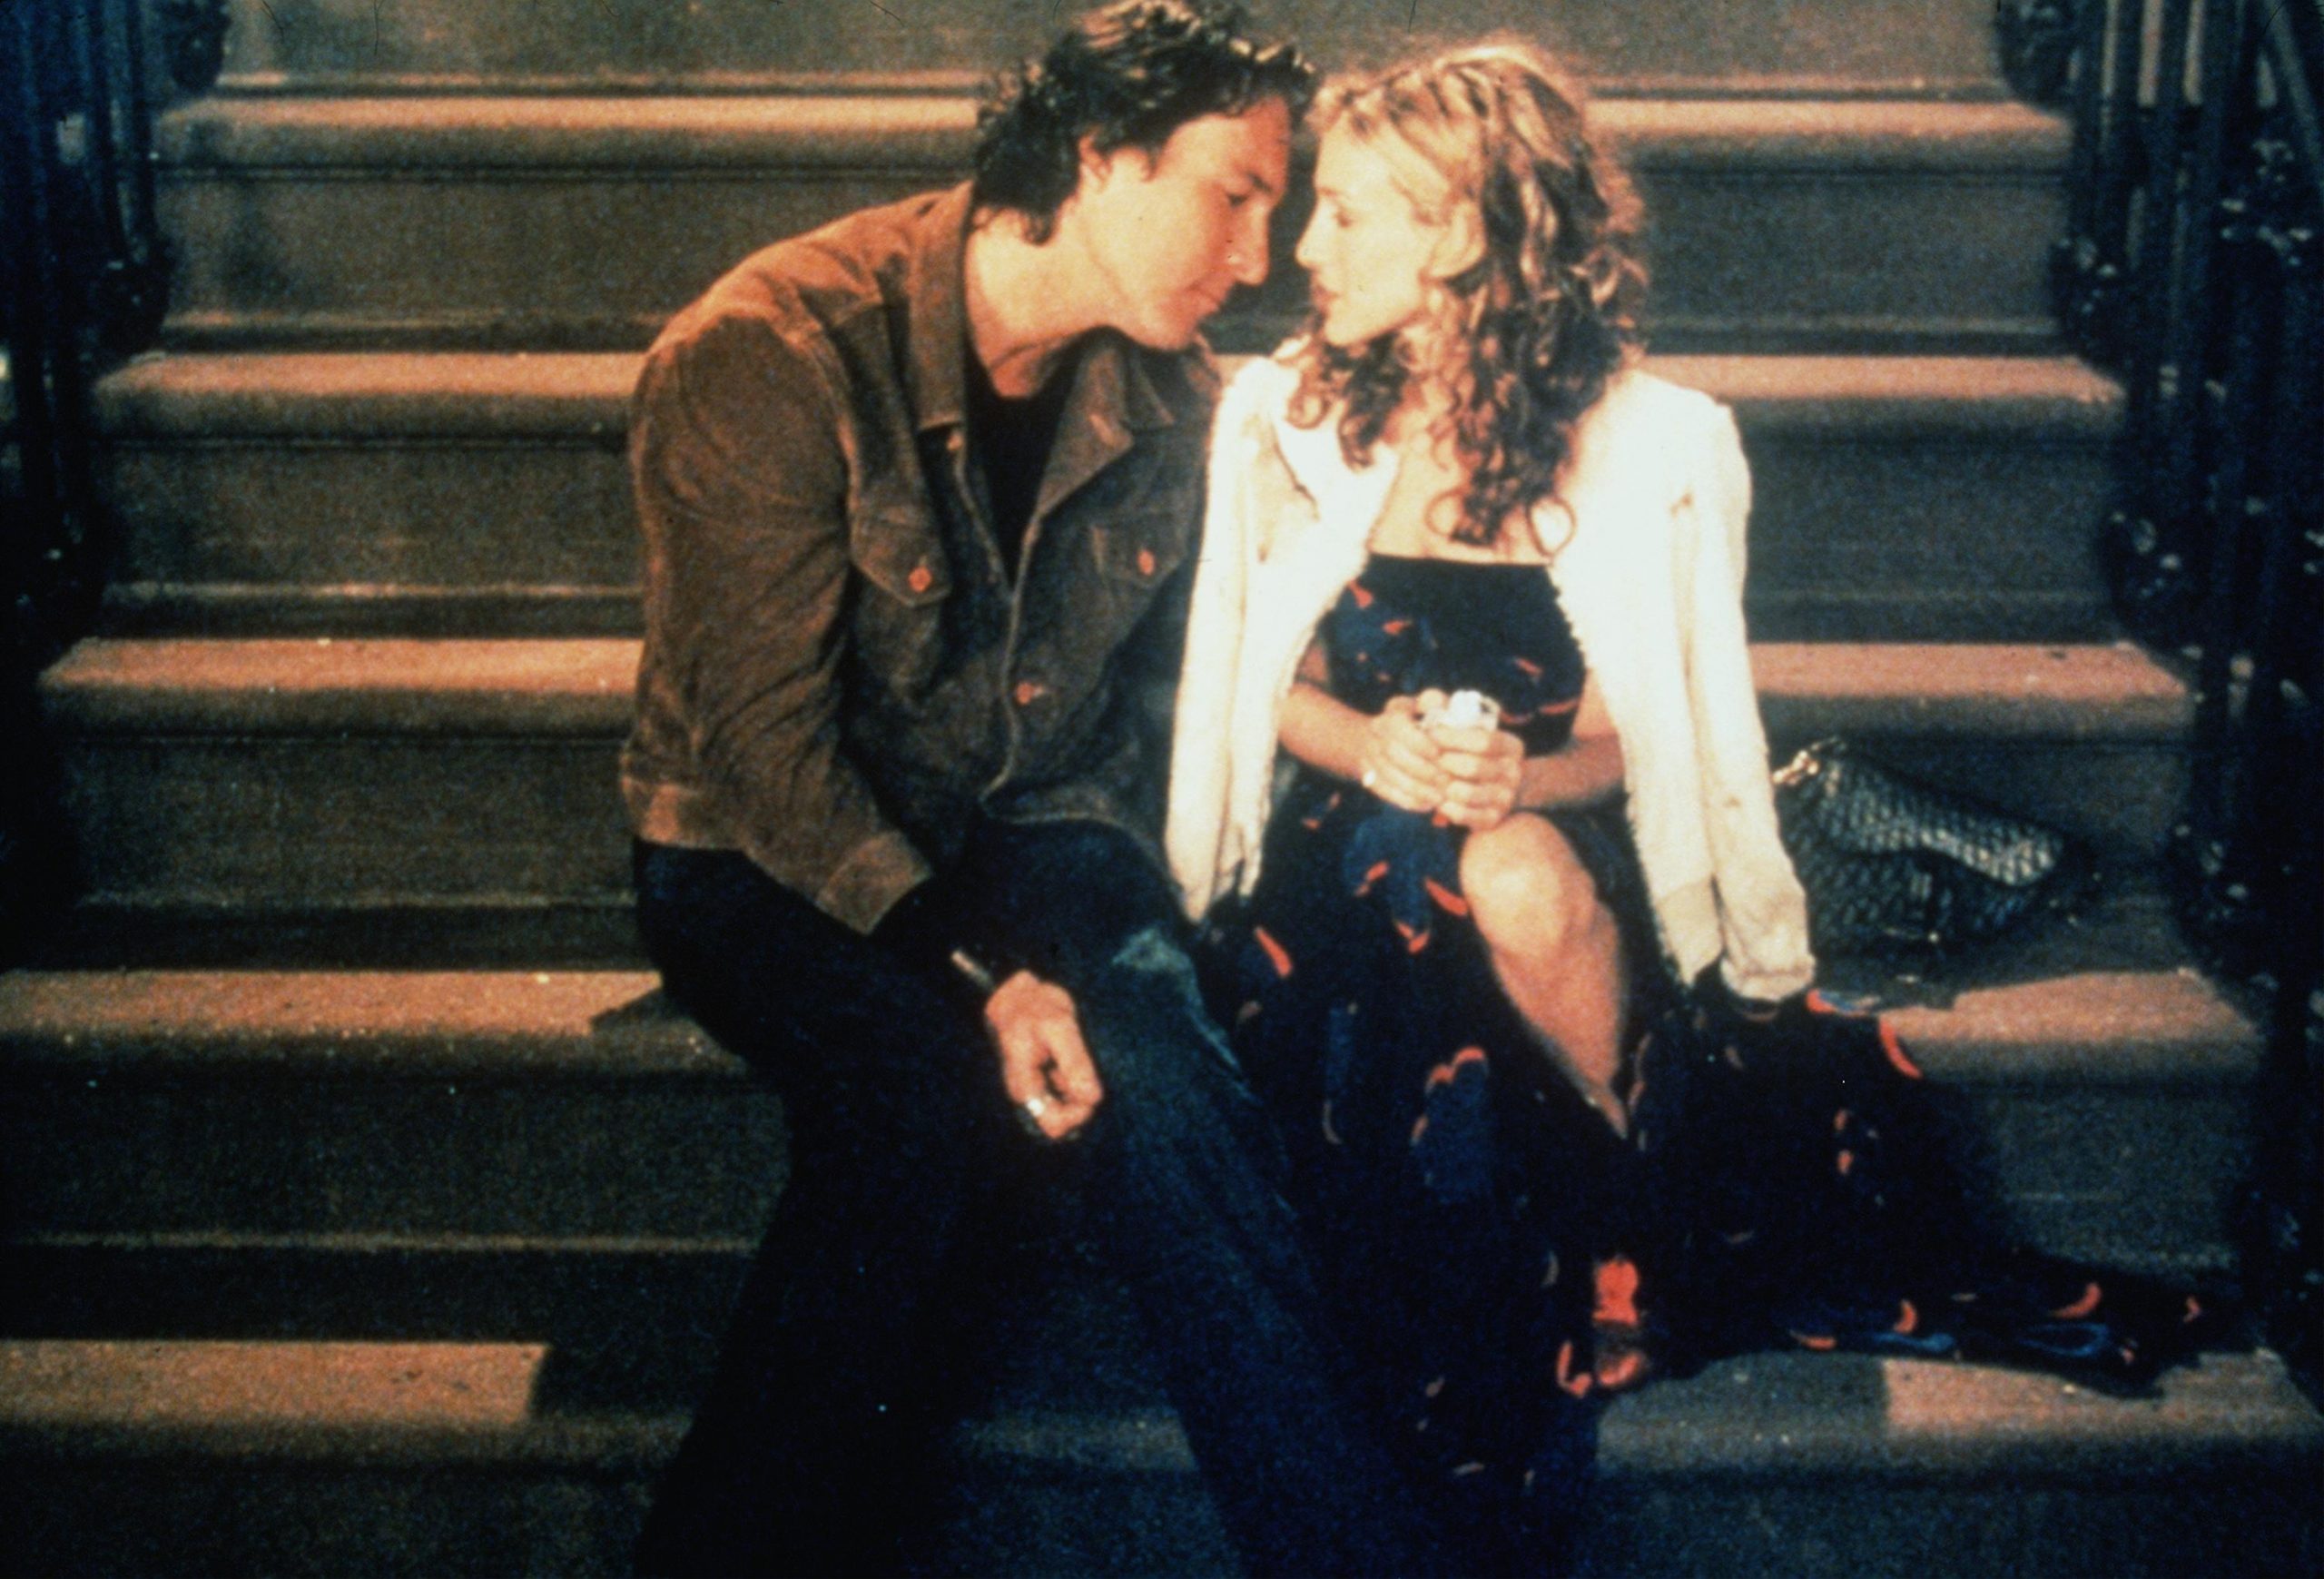 John Corbett as Aidan Shaw and Sarah Jessica Parker as Carrie Bradshaw sit on the steps of her apartment in 'Sex and the City'